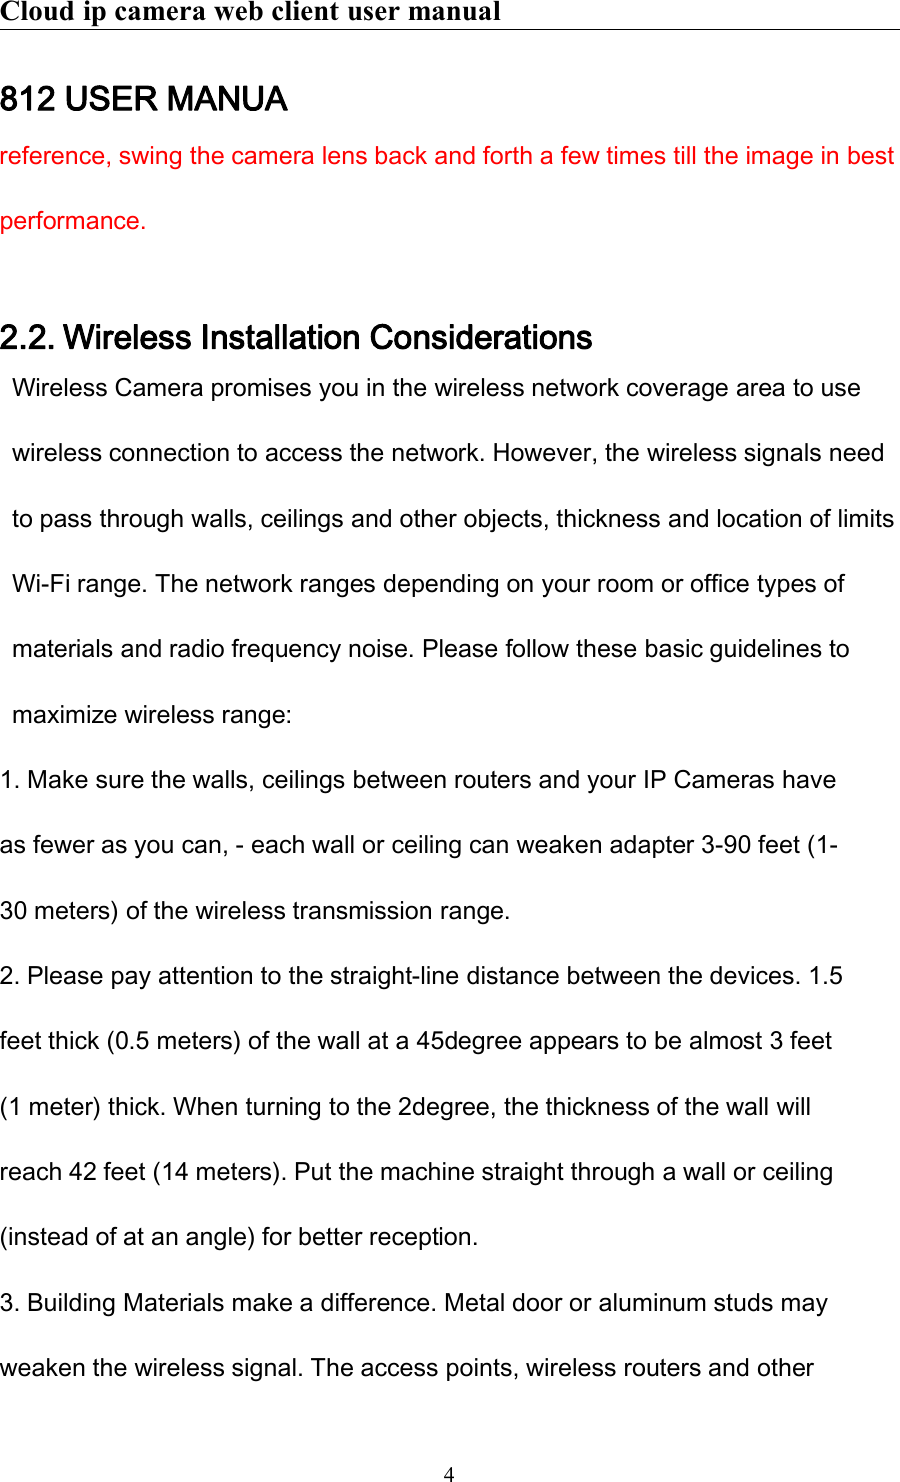 Cloud ip camera web client user manual4812 USER MANUAreference, swing the camera lens back and forth a few times till the image in bestperformance.2.2. Wireless Installation ConsiderationsWireless Camera promises you in the wireless network coverage area to usewireless connection to access the network. However, the wireless signals needto pass through walls, ceilings and other objects, thickness and location of limitsWi-Fi range. The network ranges depending on your room or office types ofmaterials and radio frequency noise. Please follow these basic guidelines tomaximize wireless range:1. Make sure the walls, ceilings between routers and your IP Cameras haveas fewer as you can, - each wall or ceiling can weaken adapter 3-90 feet (1-30 meters) of the wireless transmission range.2. Please pay attention to the straight-line distance between the devices. 1.5feet thick (0.5 meters) of the wall at a 45degree appears to be almost 3 feet(1 meter) thick. When turning to the 2degree, the thickness of the wall willreach 42 feet (14 meters). Put the machine straight through a wall or ceiling(instead of at an angle) for better reception.3. Building Materials make a difference. Metal door or aluminum studs mayweaken the wireless signal. The access points, wireless routers and other